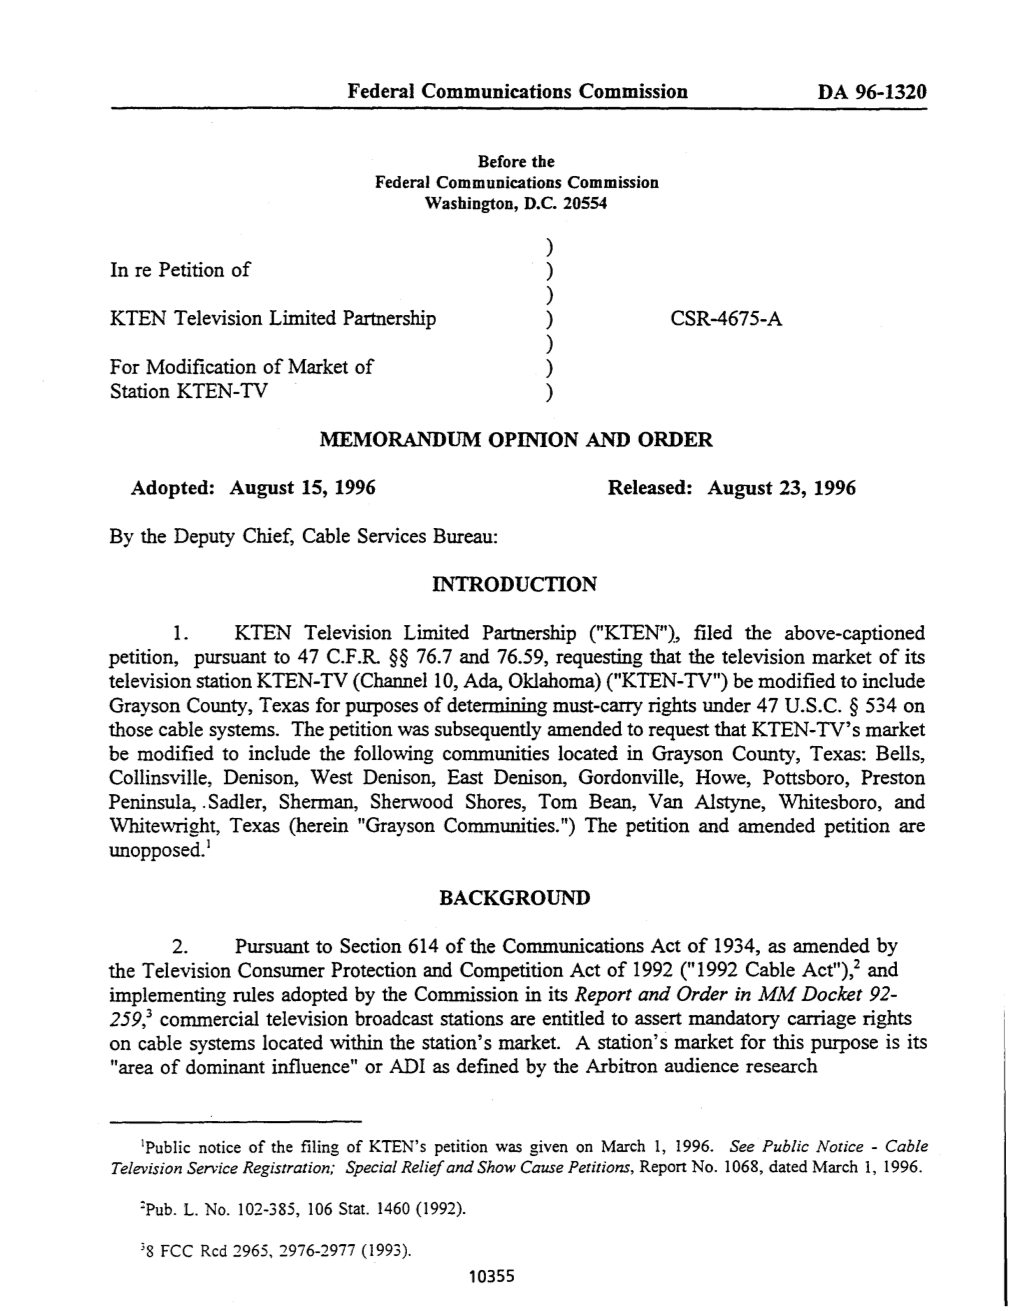 Federal Communications Commission in Re Petition of KTEN Television